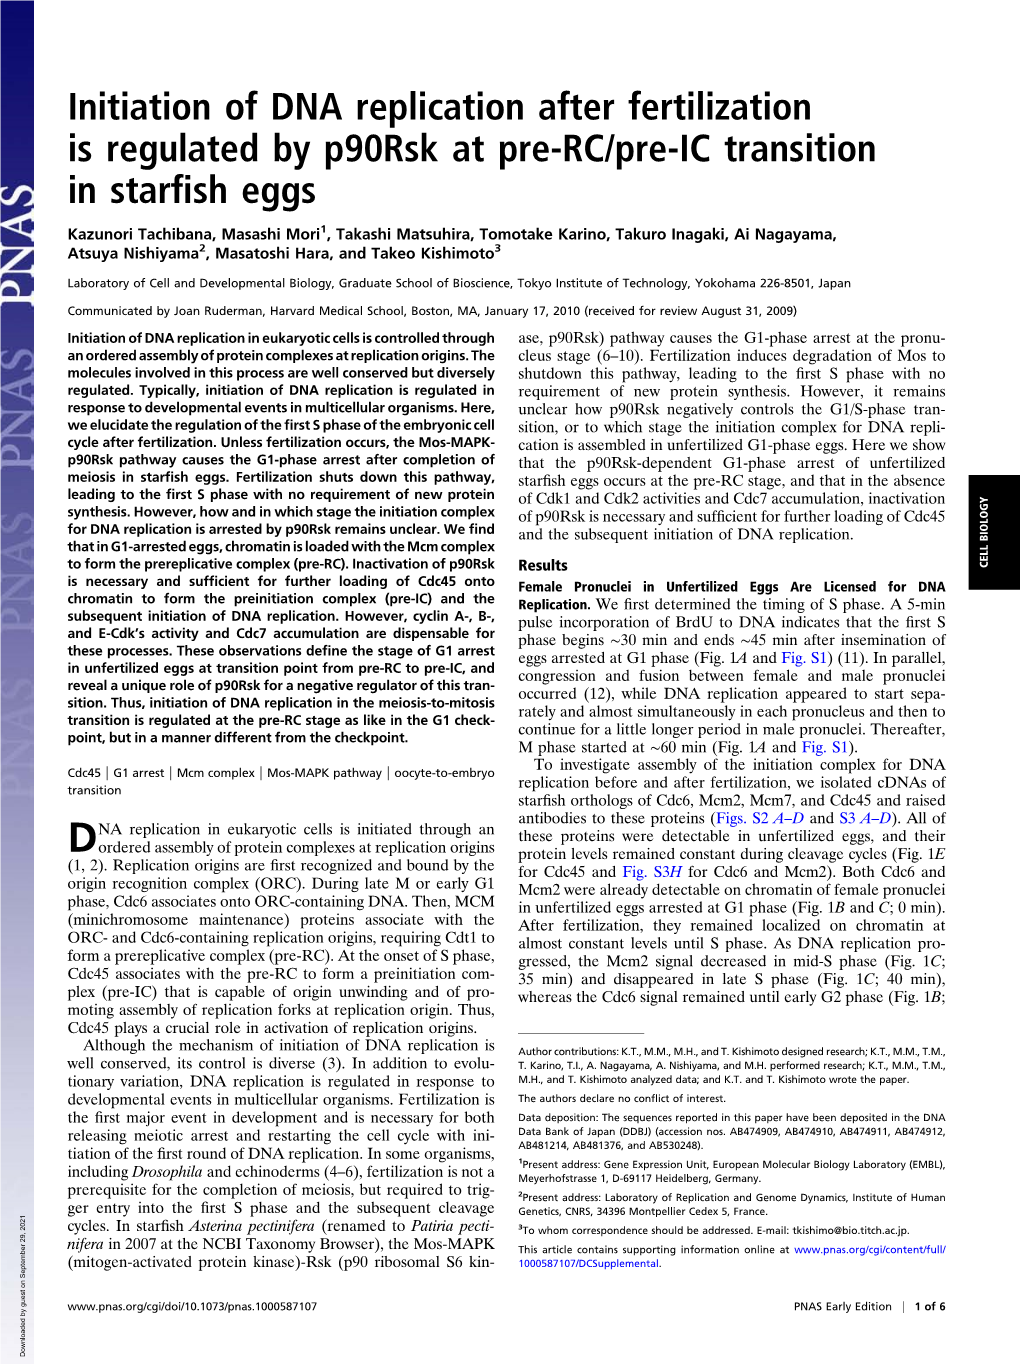 Initiation of DNA Replication After Fertilization Is Regulated by P90rsk at Pre-RC/Pre-IC Transition in Starfish Eggs